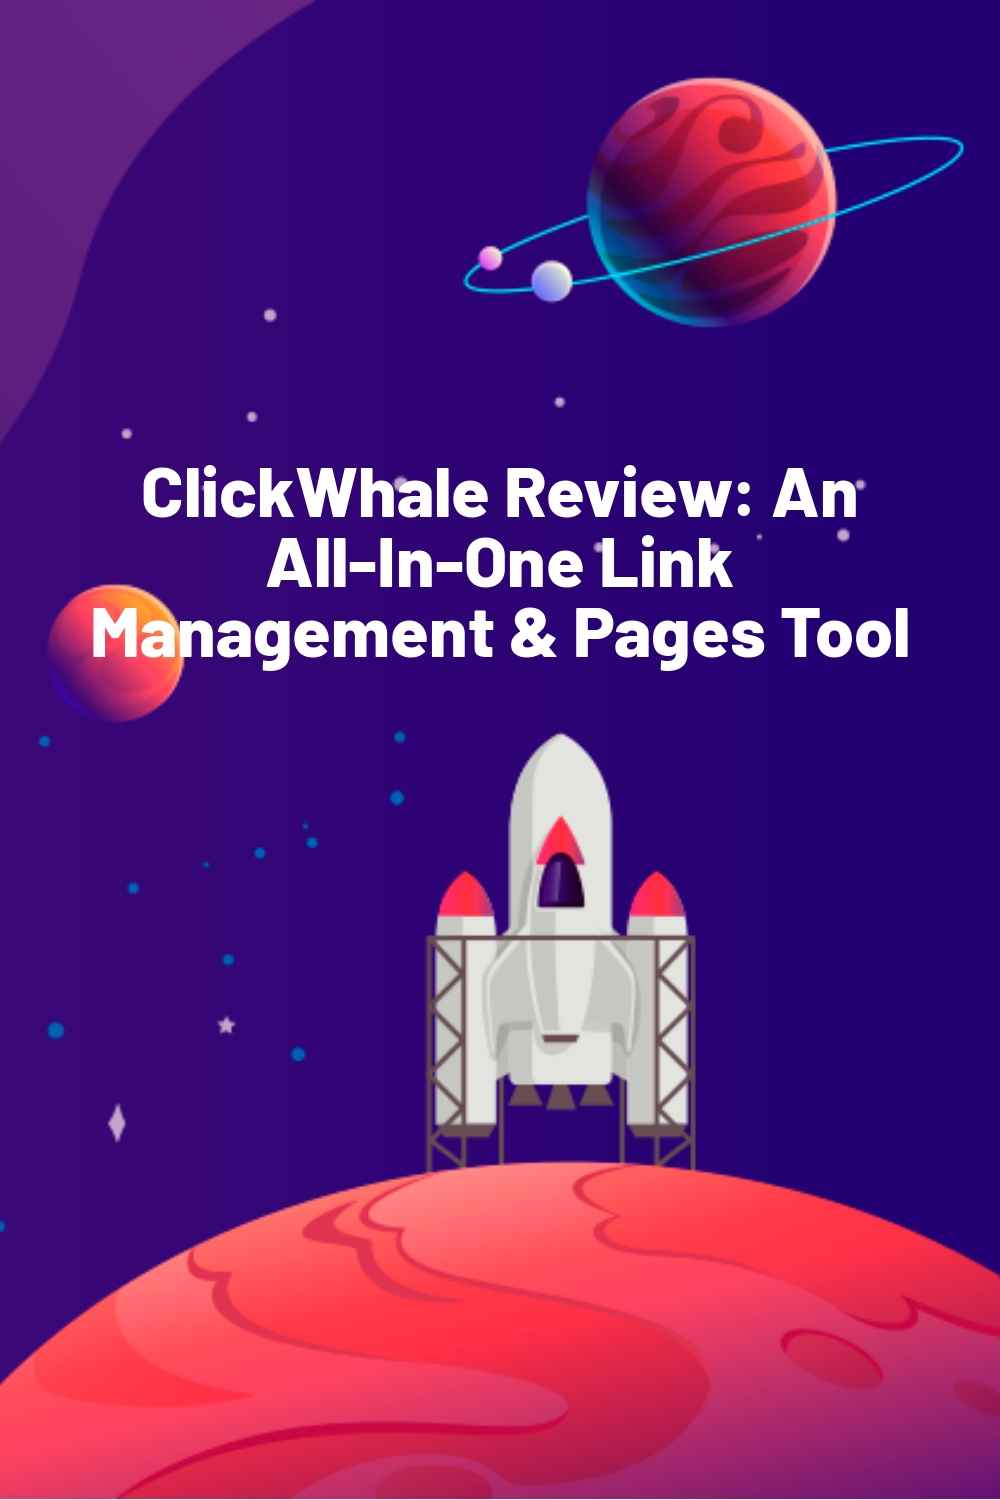 ClickWhale Review: An All-In-One Link Management & Pages Tool